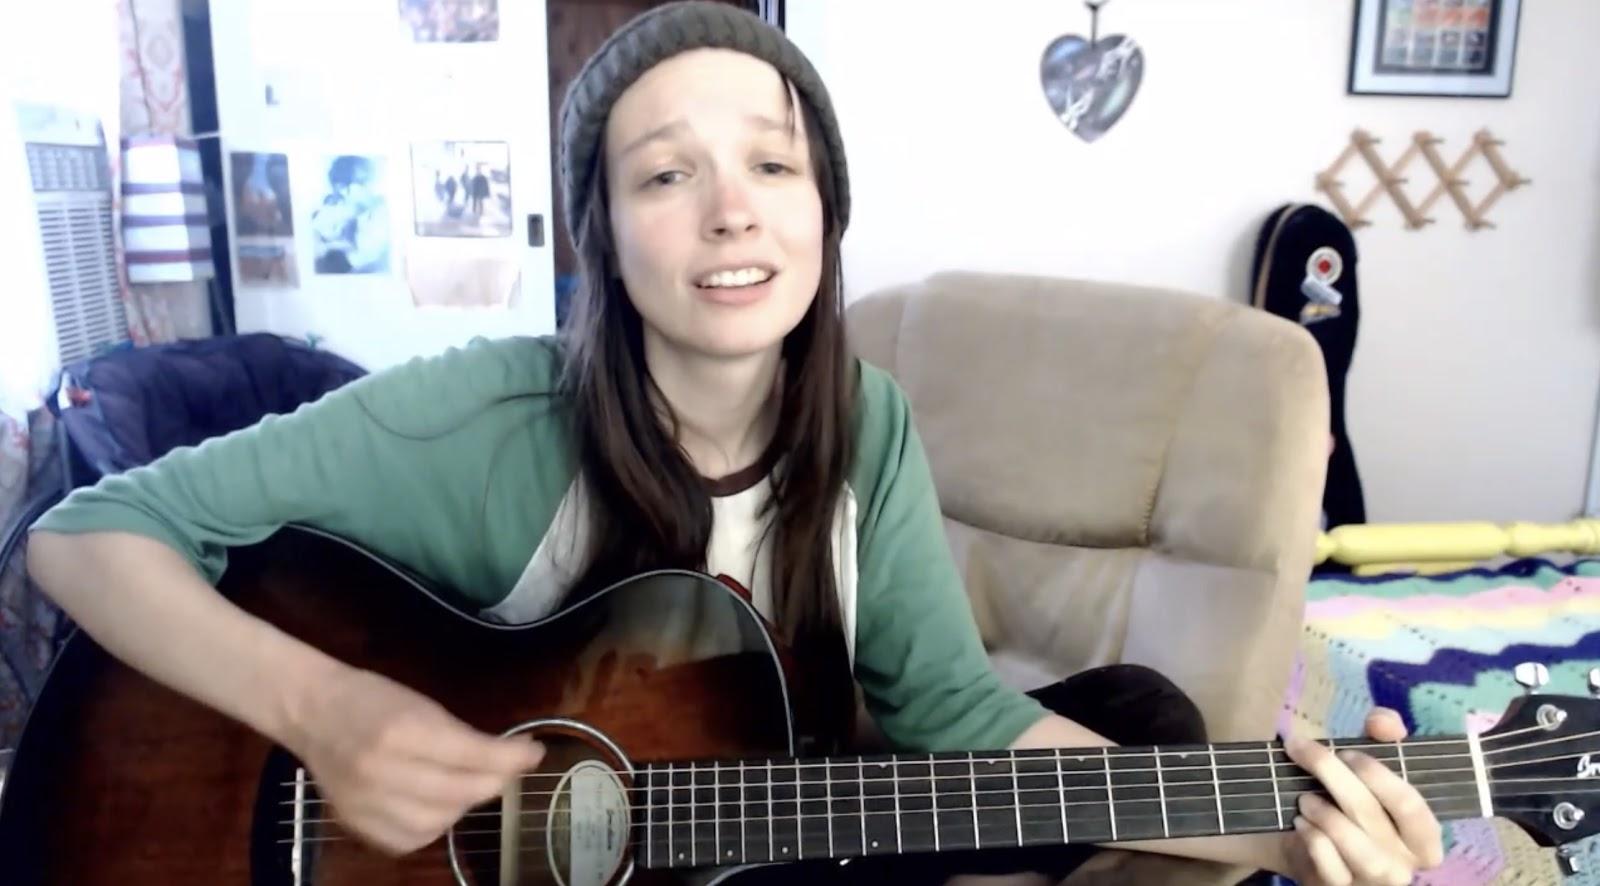 Erin Olds performing “Where Is Here” during the live stream.